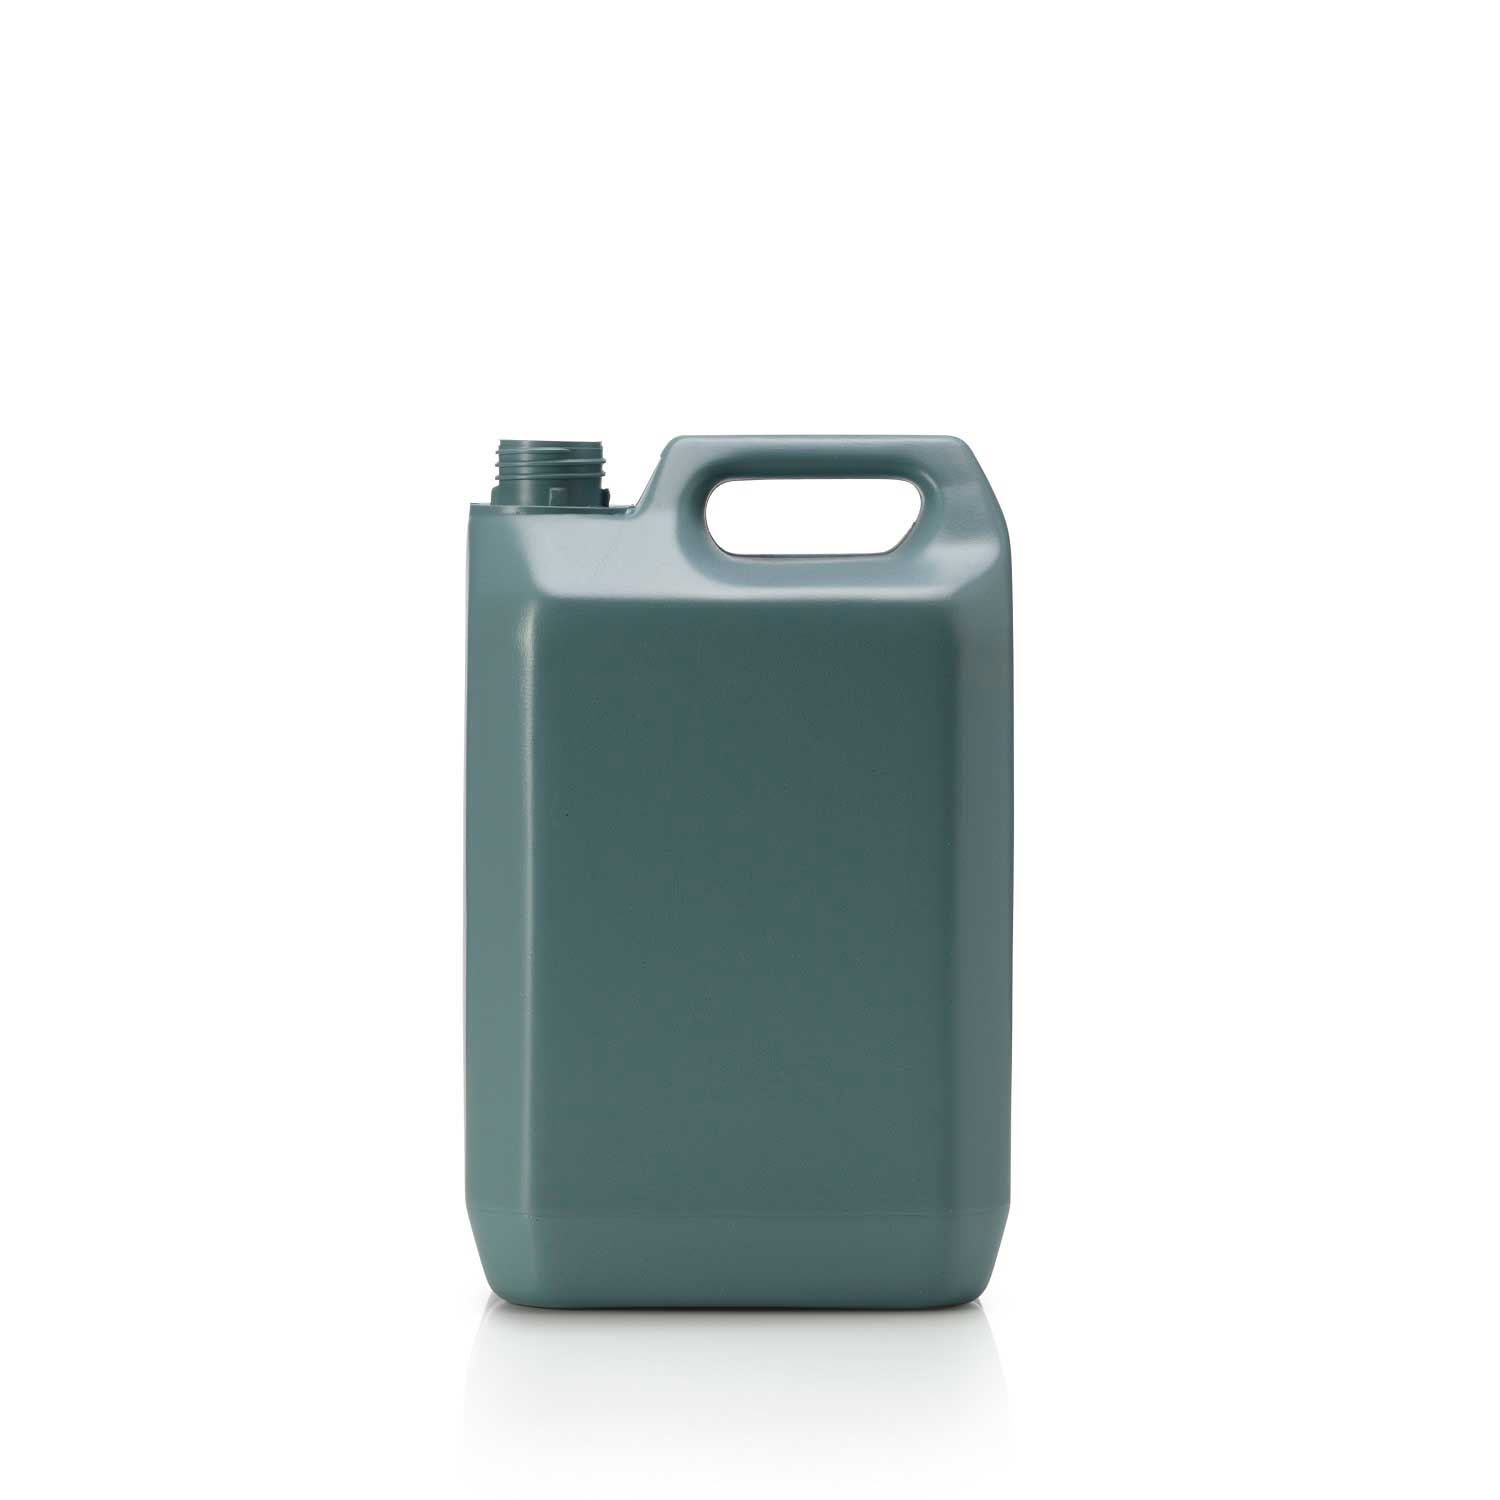 Providers Of 5 Ltr Natural rHDPE Jerry Can UK